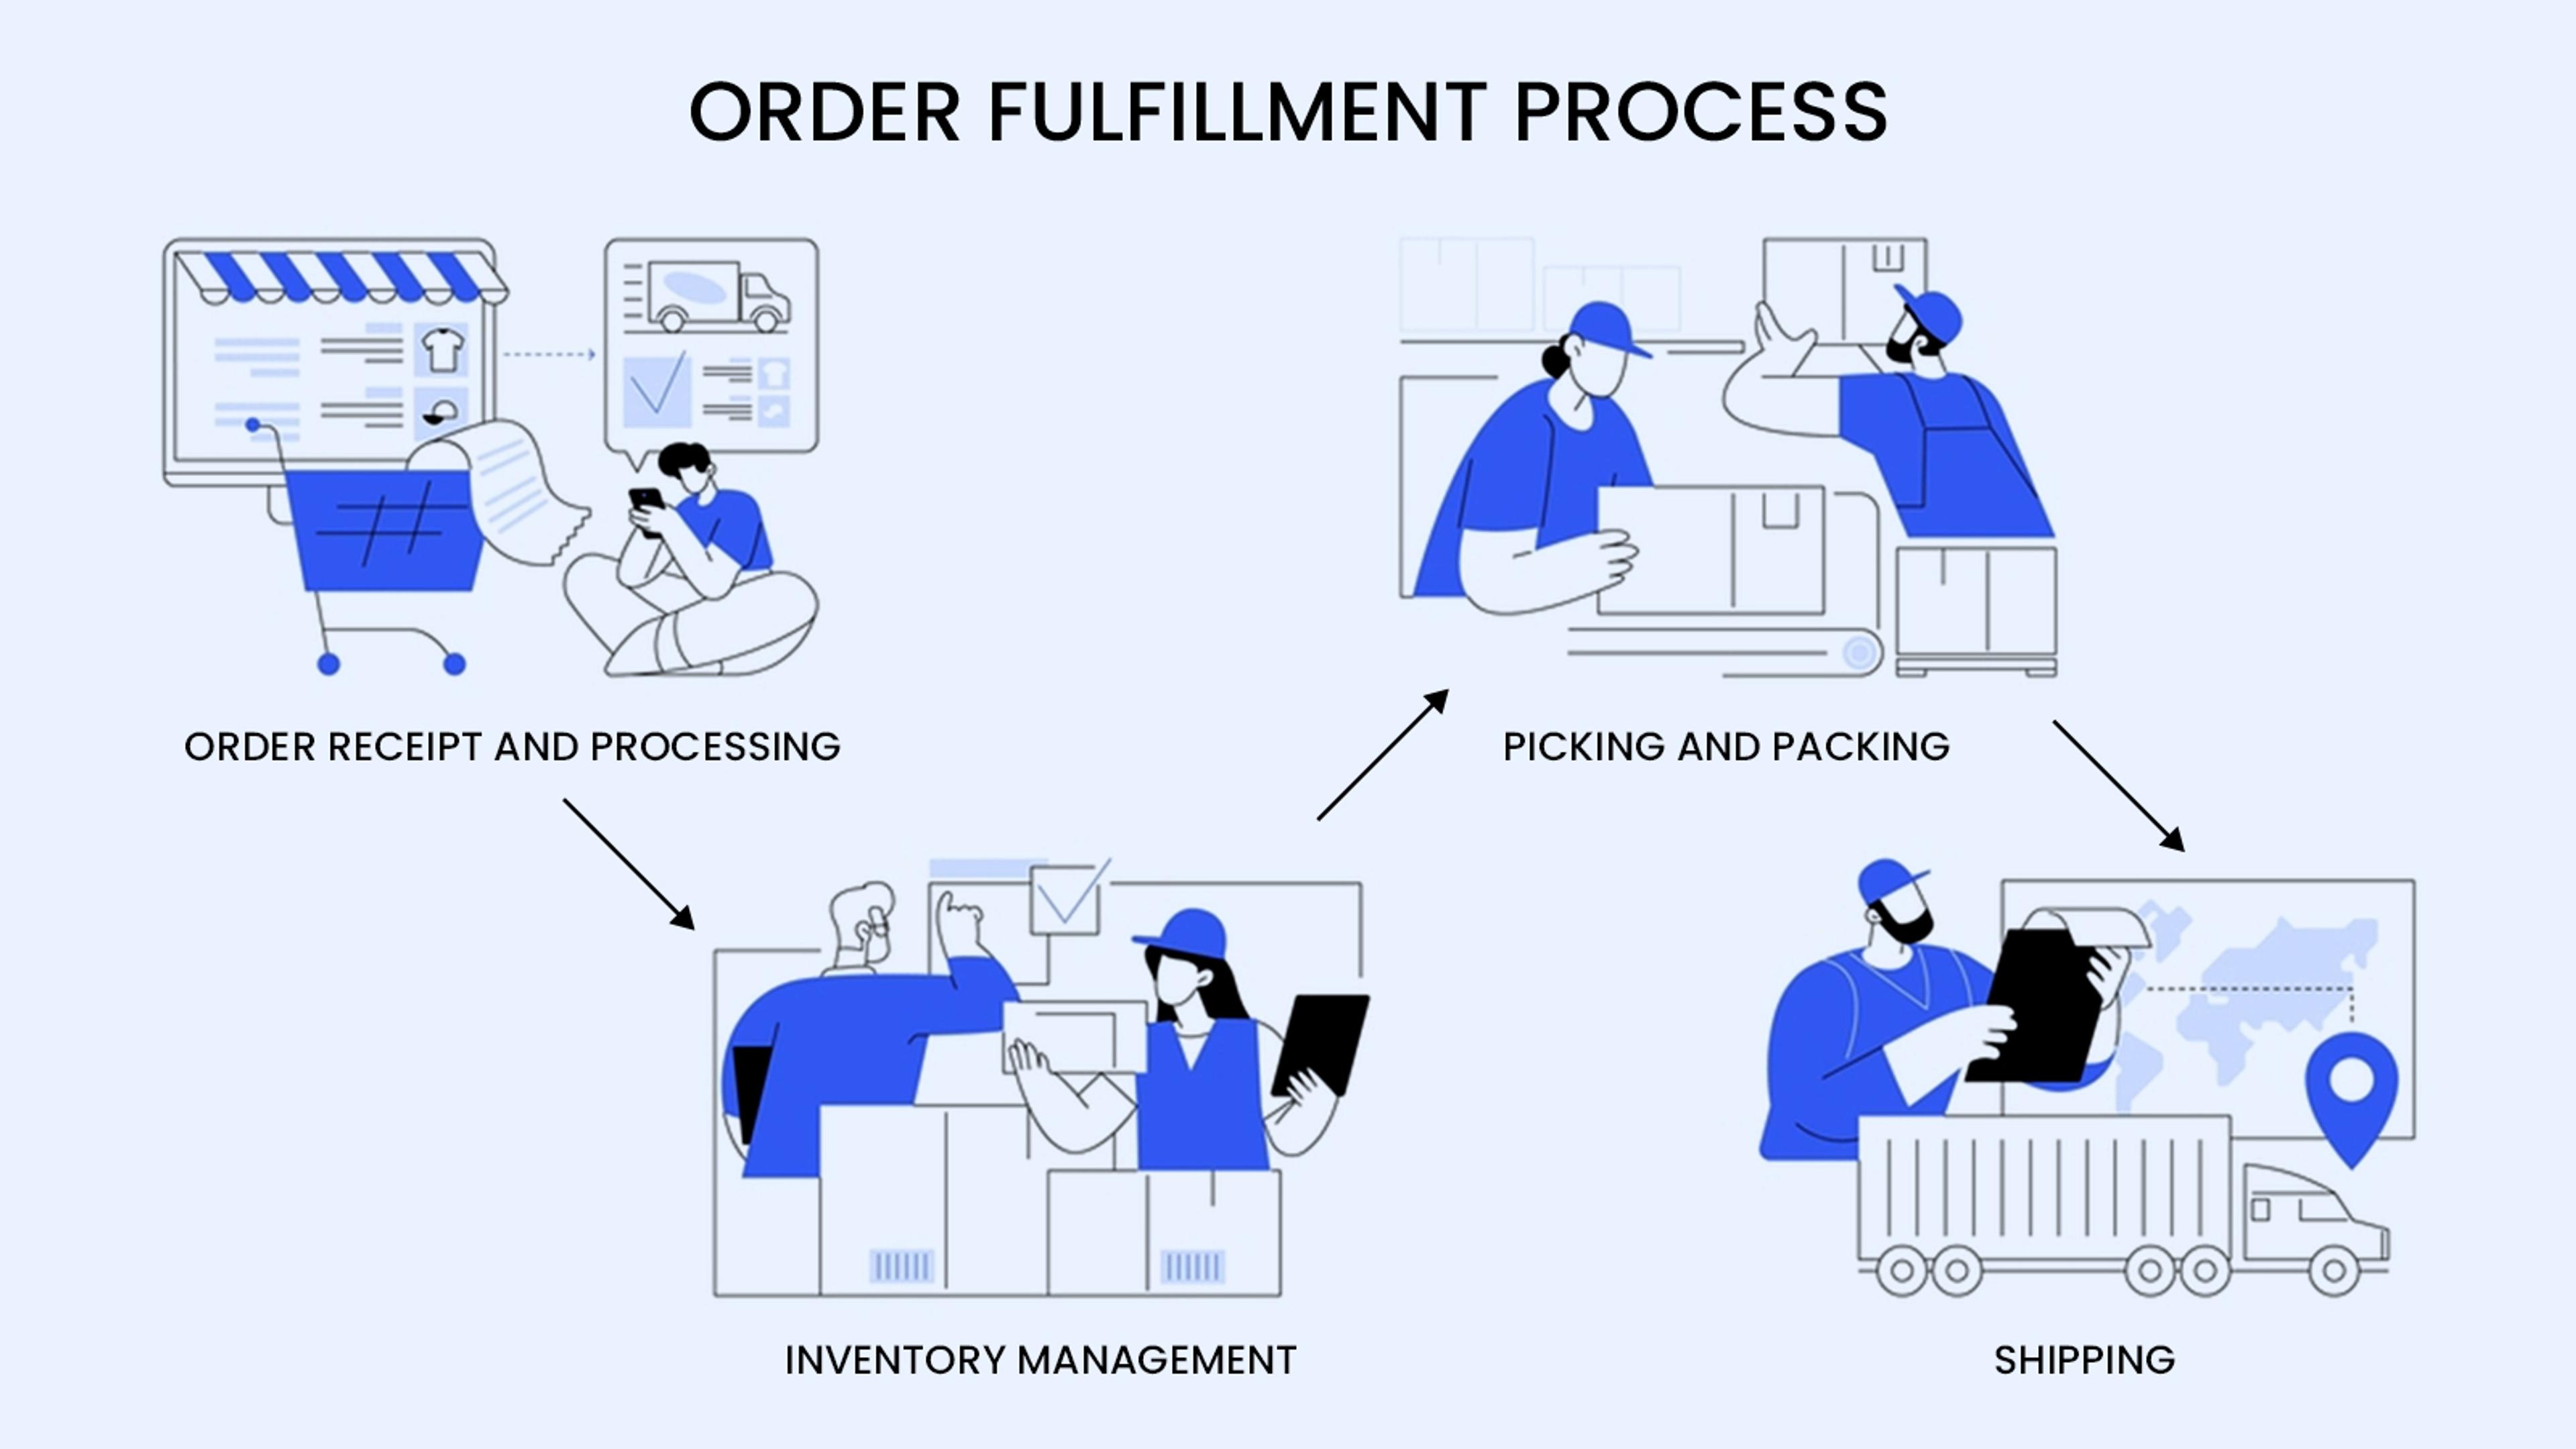 What Are the Benefits of Order Fulfillment?